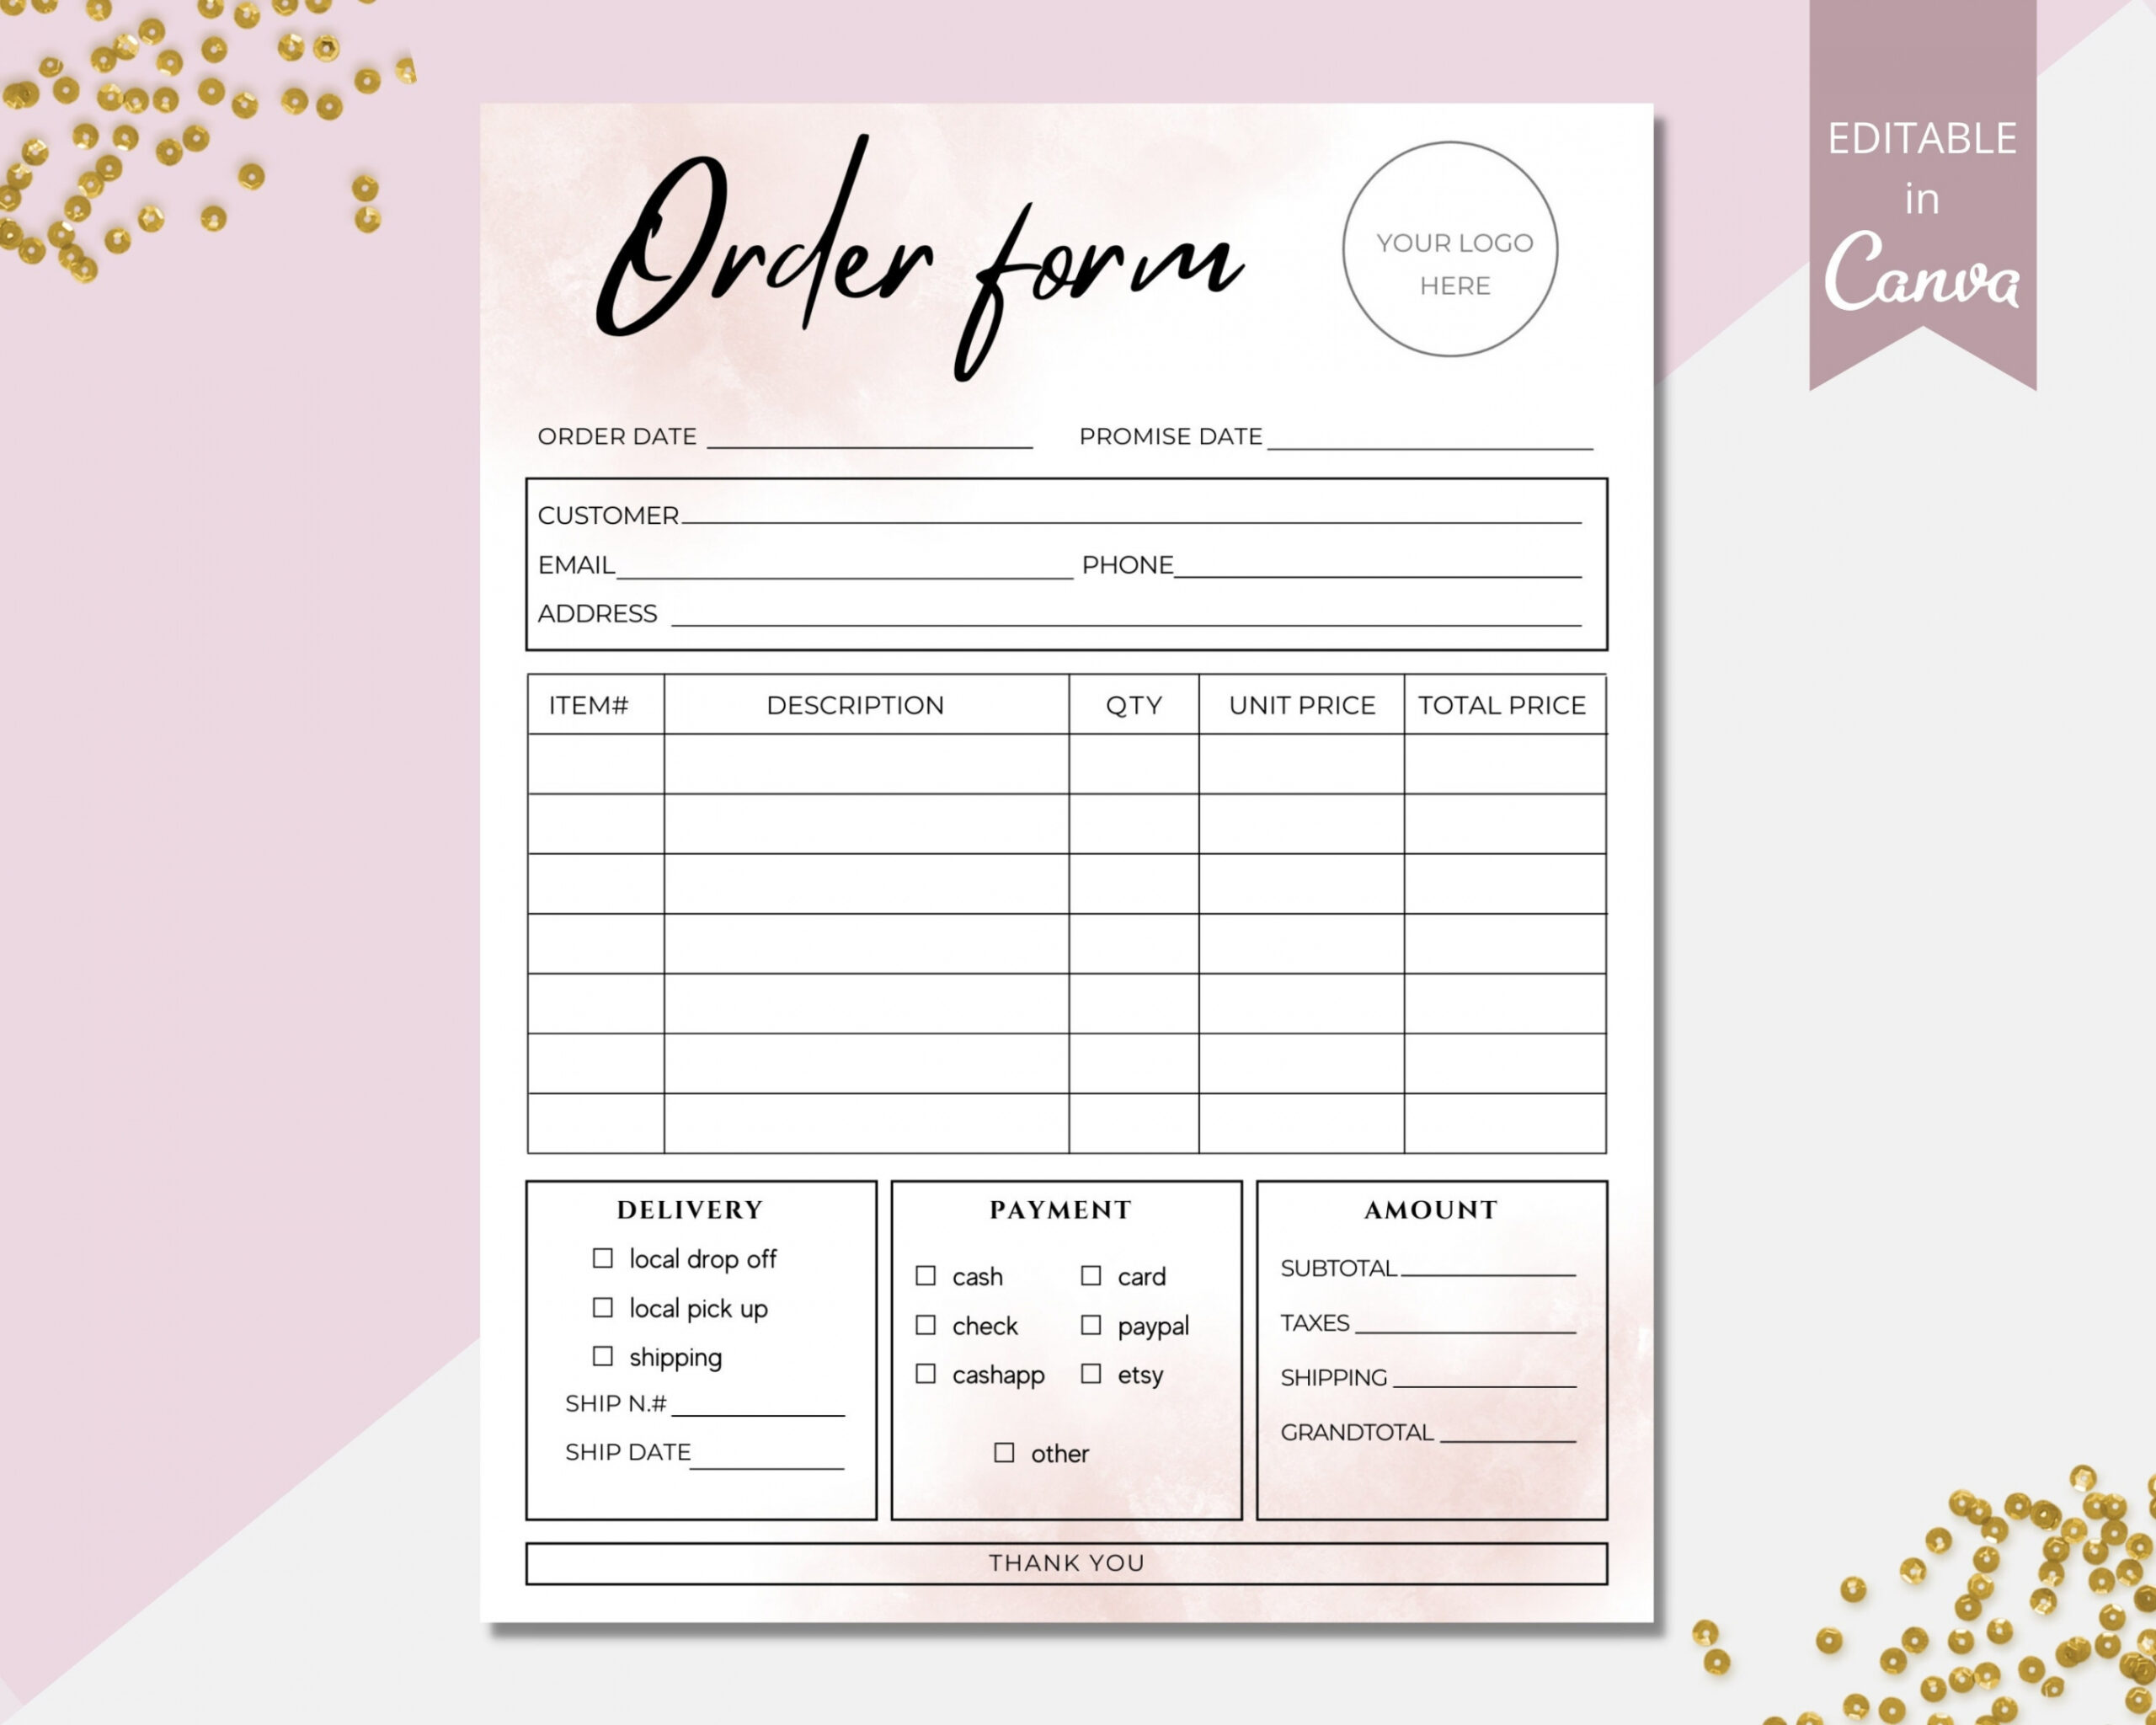 Order Form Template Editable Small Business Order Forms - Etsy  - FREE Printables - Small Business Free Printable Order Forms For Crafts